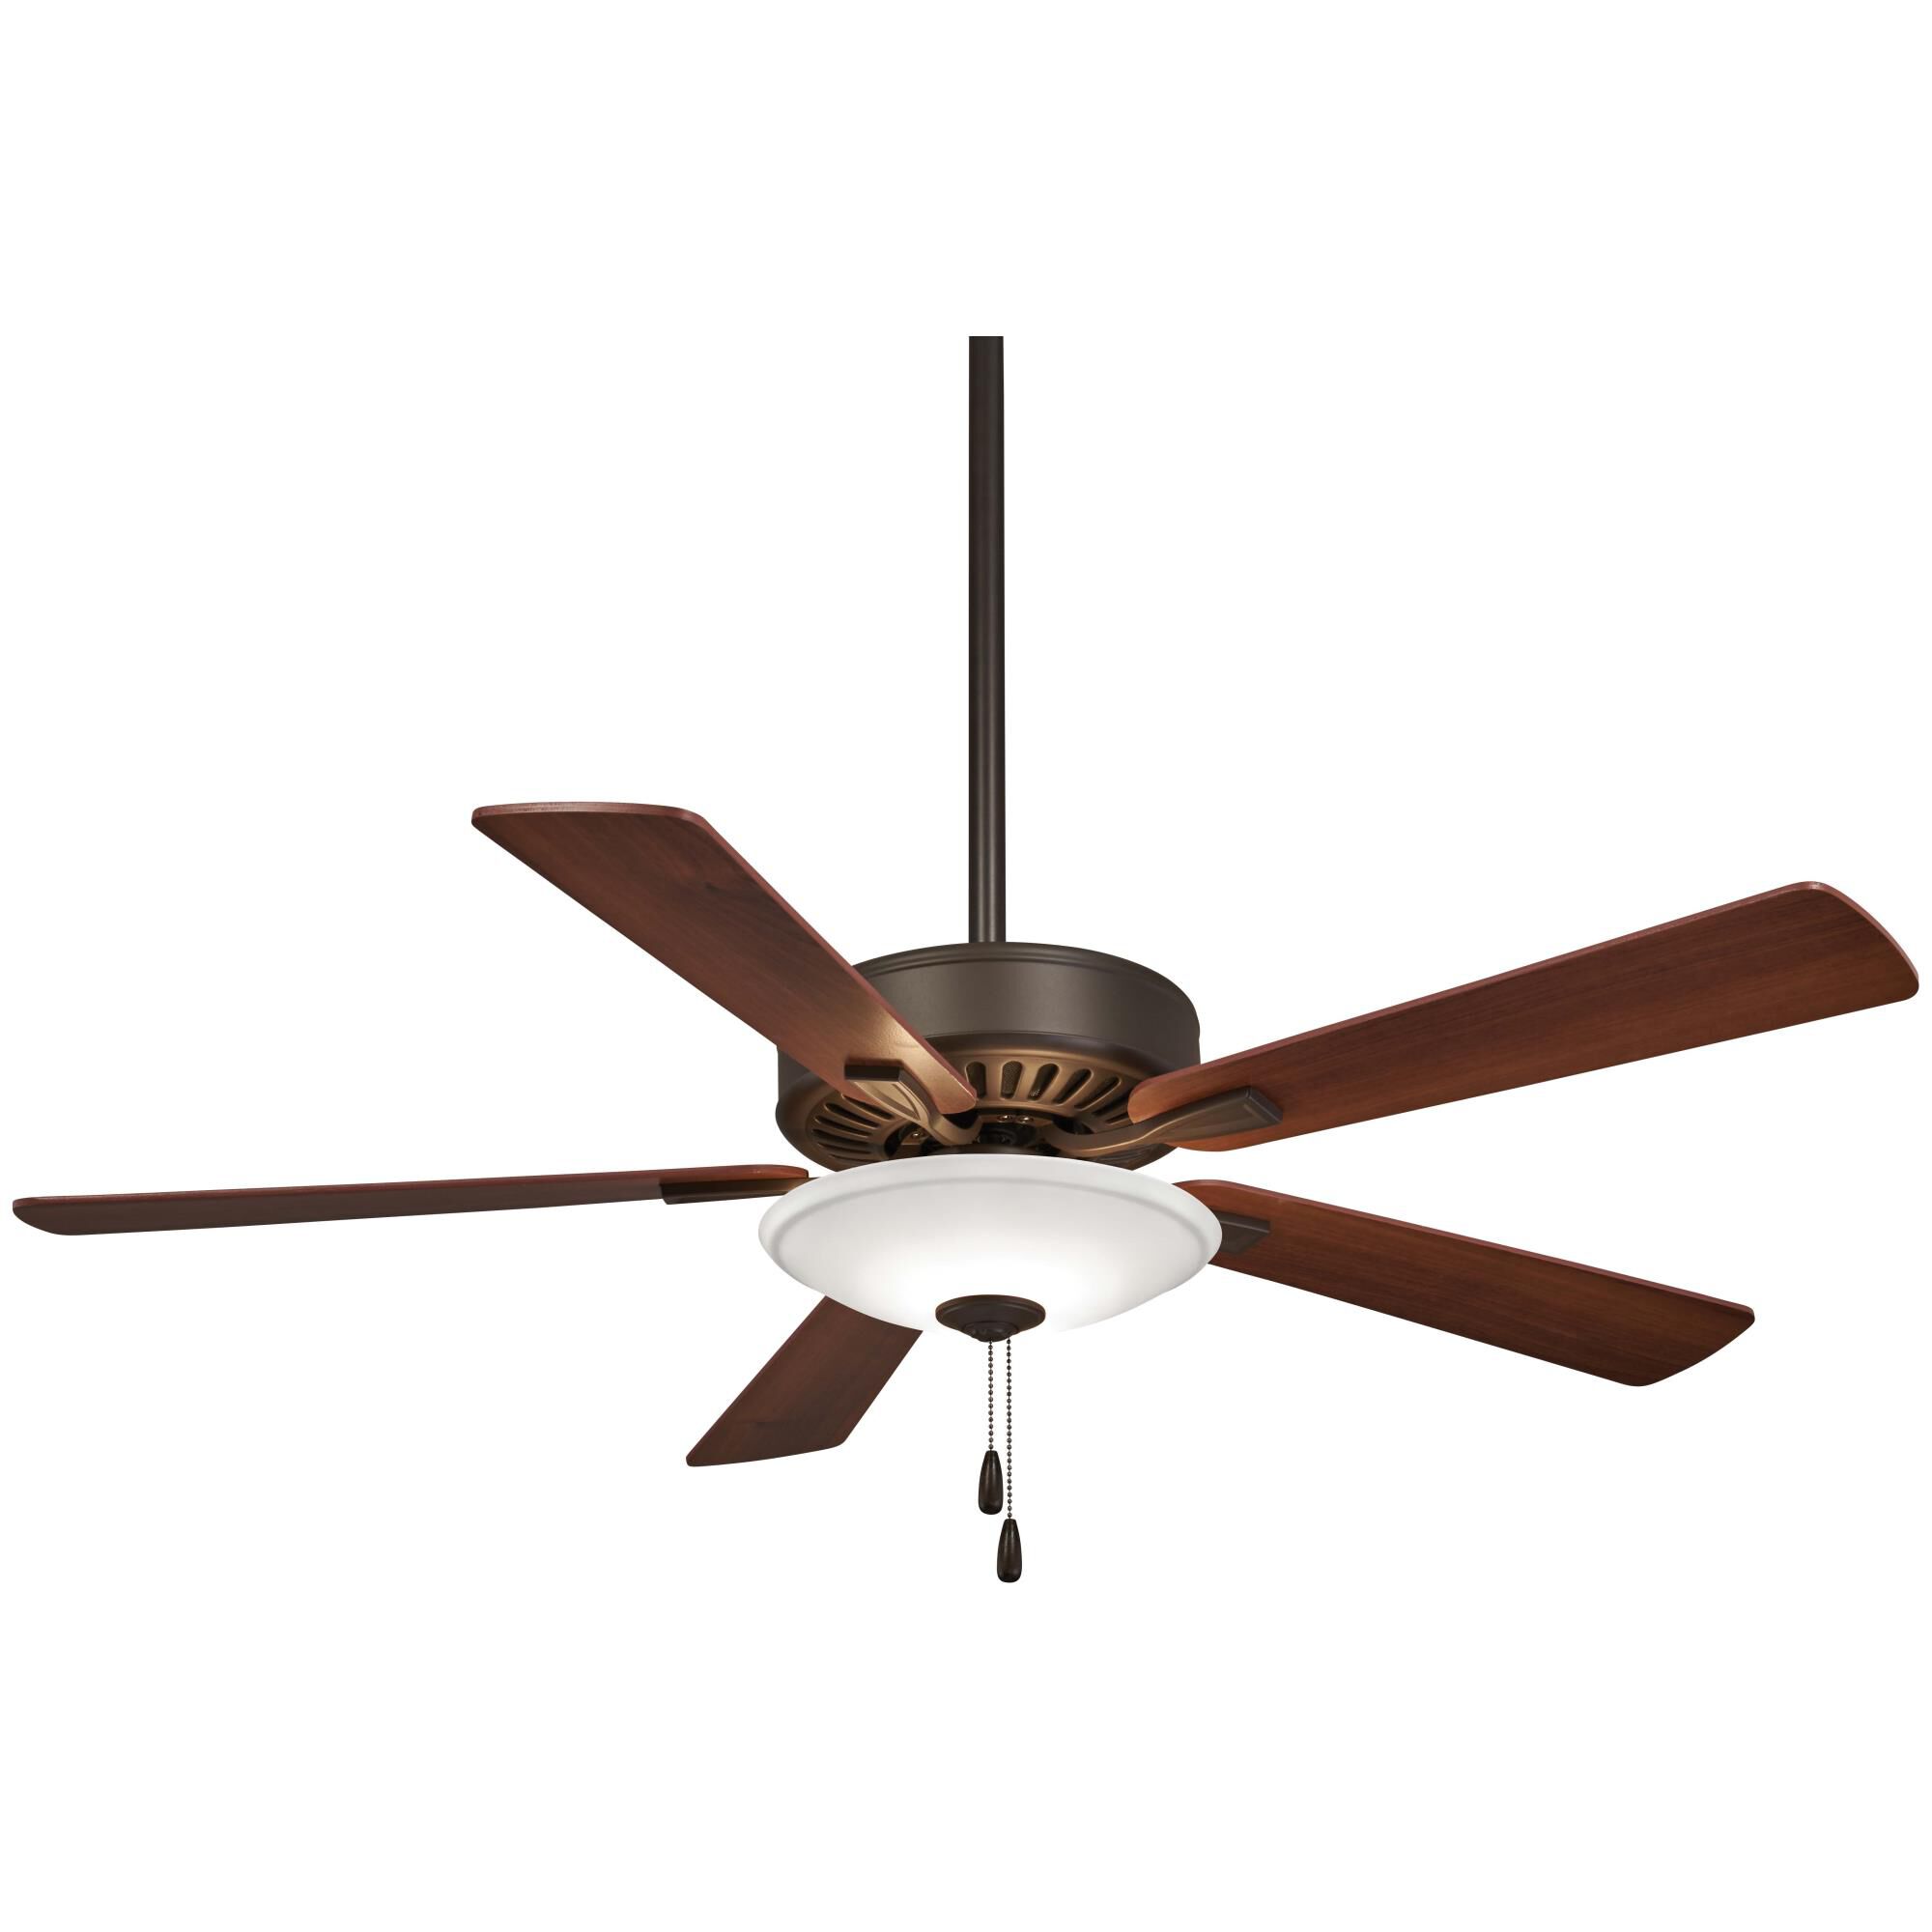 Photos - Fan Minka Aire Contractor 52 Inch Ceiling  with Light Kit Contractor - F656